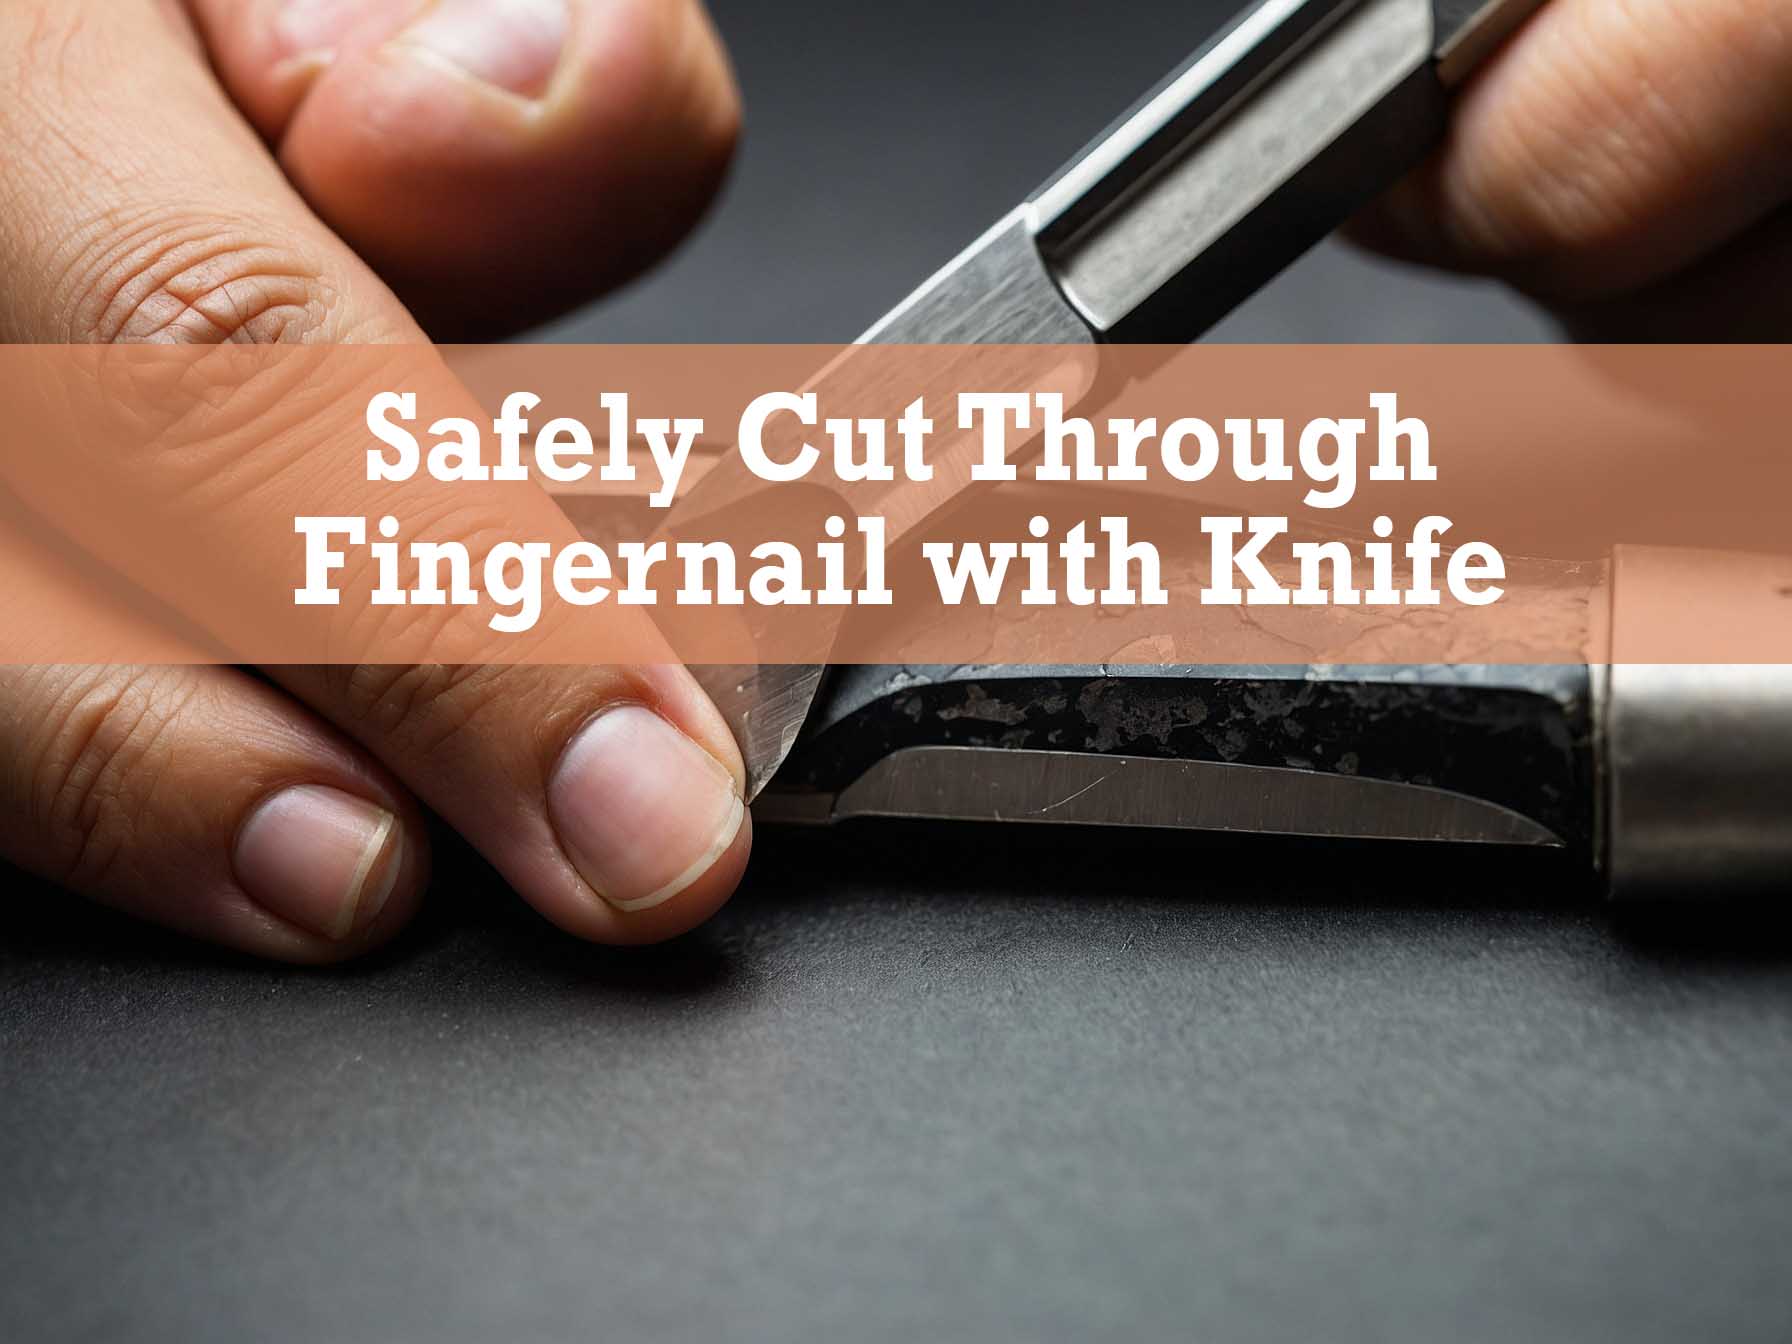 Safely Cut Through Fingernail with Knife